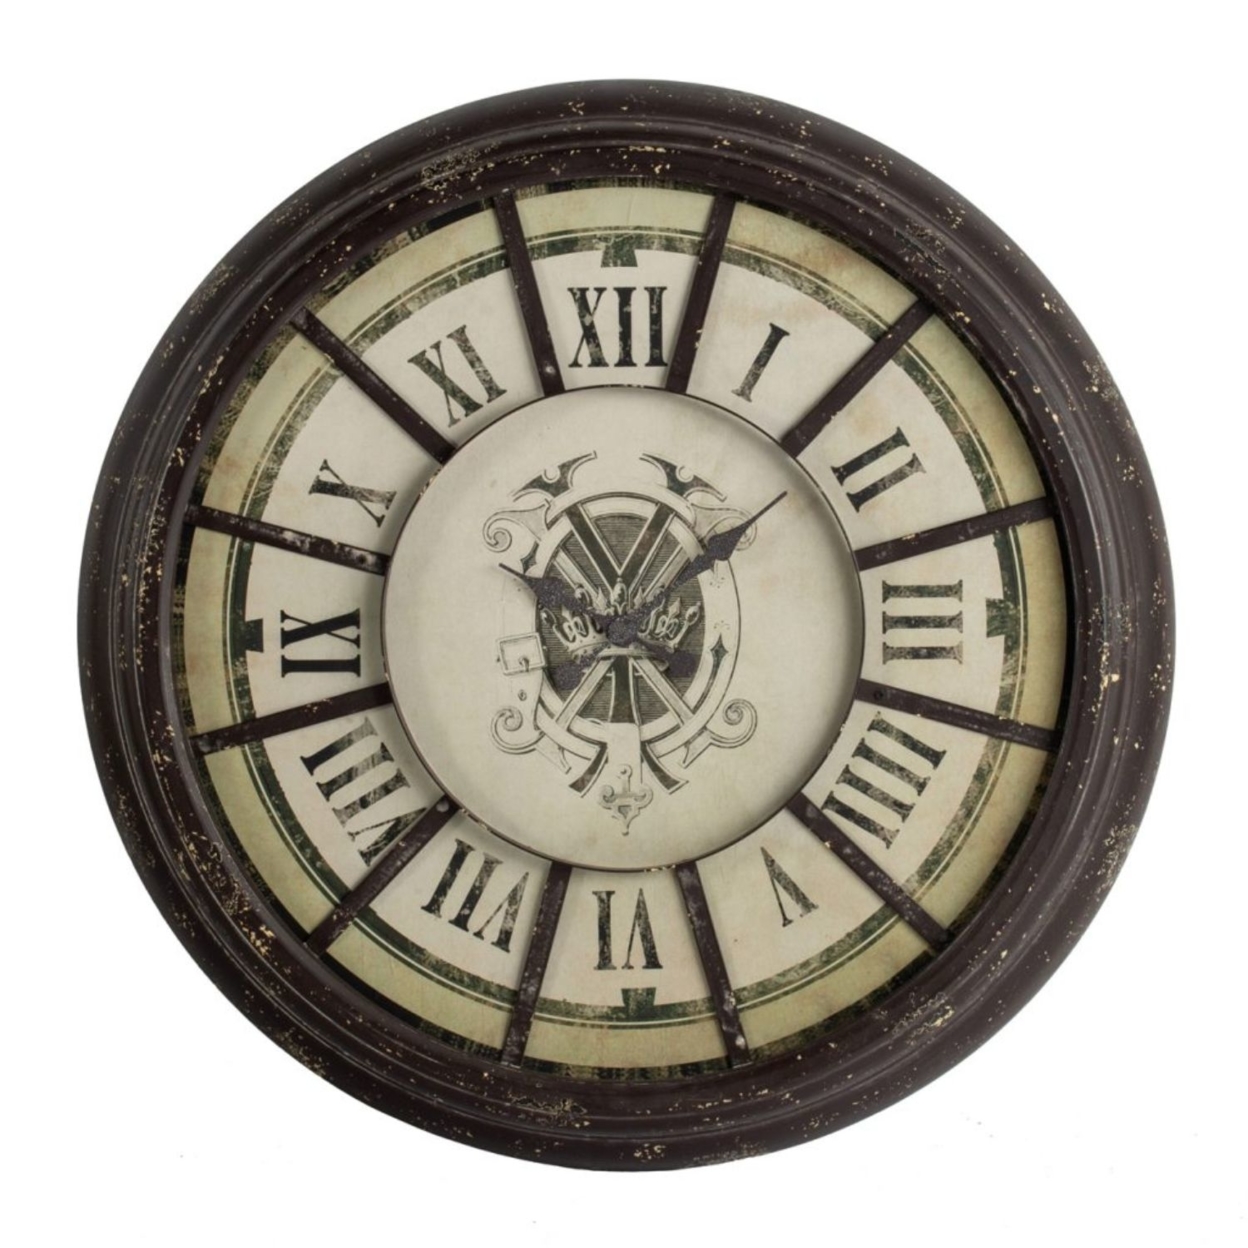 Oversized Wood And Metal Wall Clock With Distressed Details, Antique Gray And Cream- Saltoro Sherpi